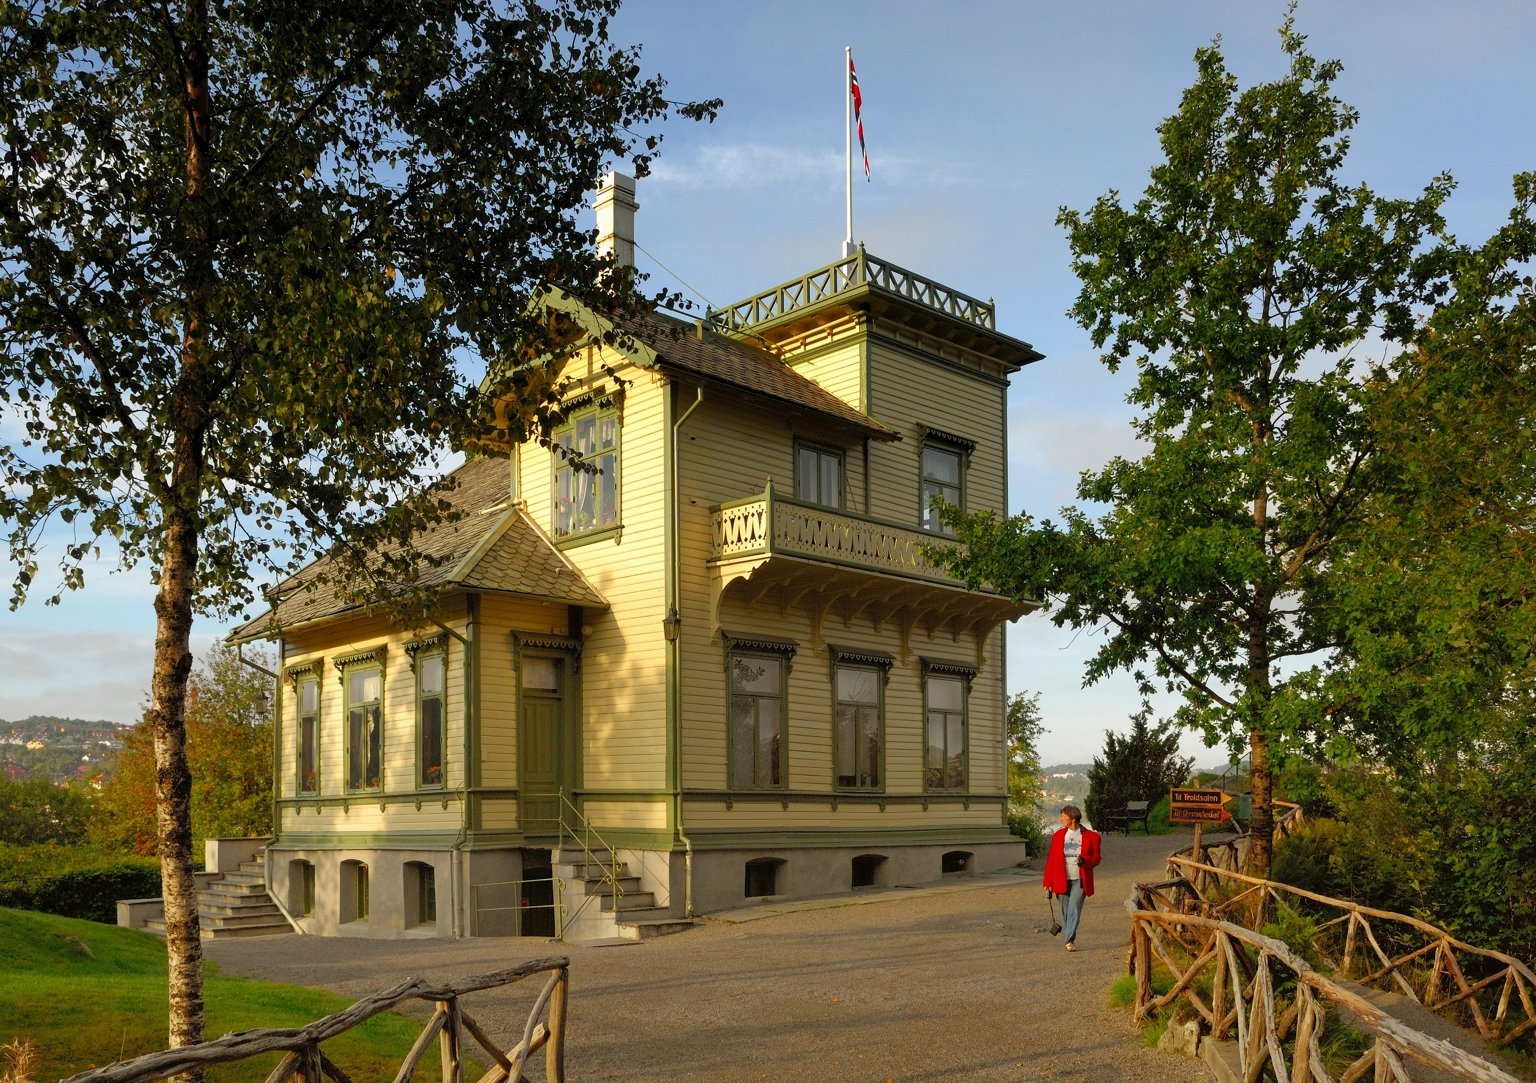 Troldhaugen and its surroundings are now operated as the Edvard Grieg Museum Troldhaugen, which is dedicated to the memory of Edvard Grieg.